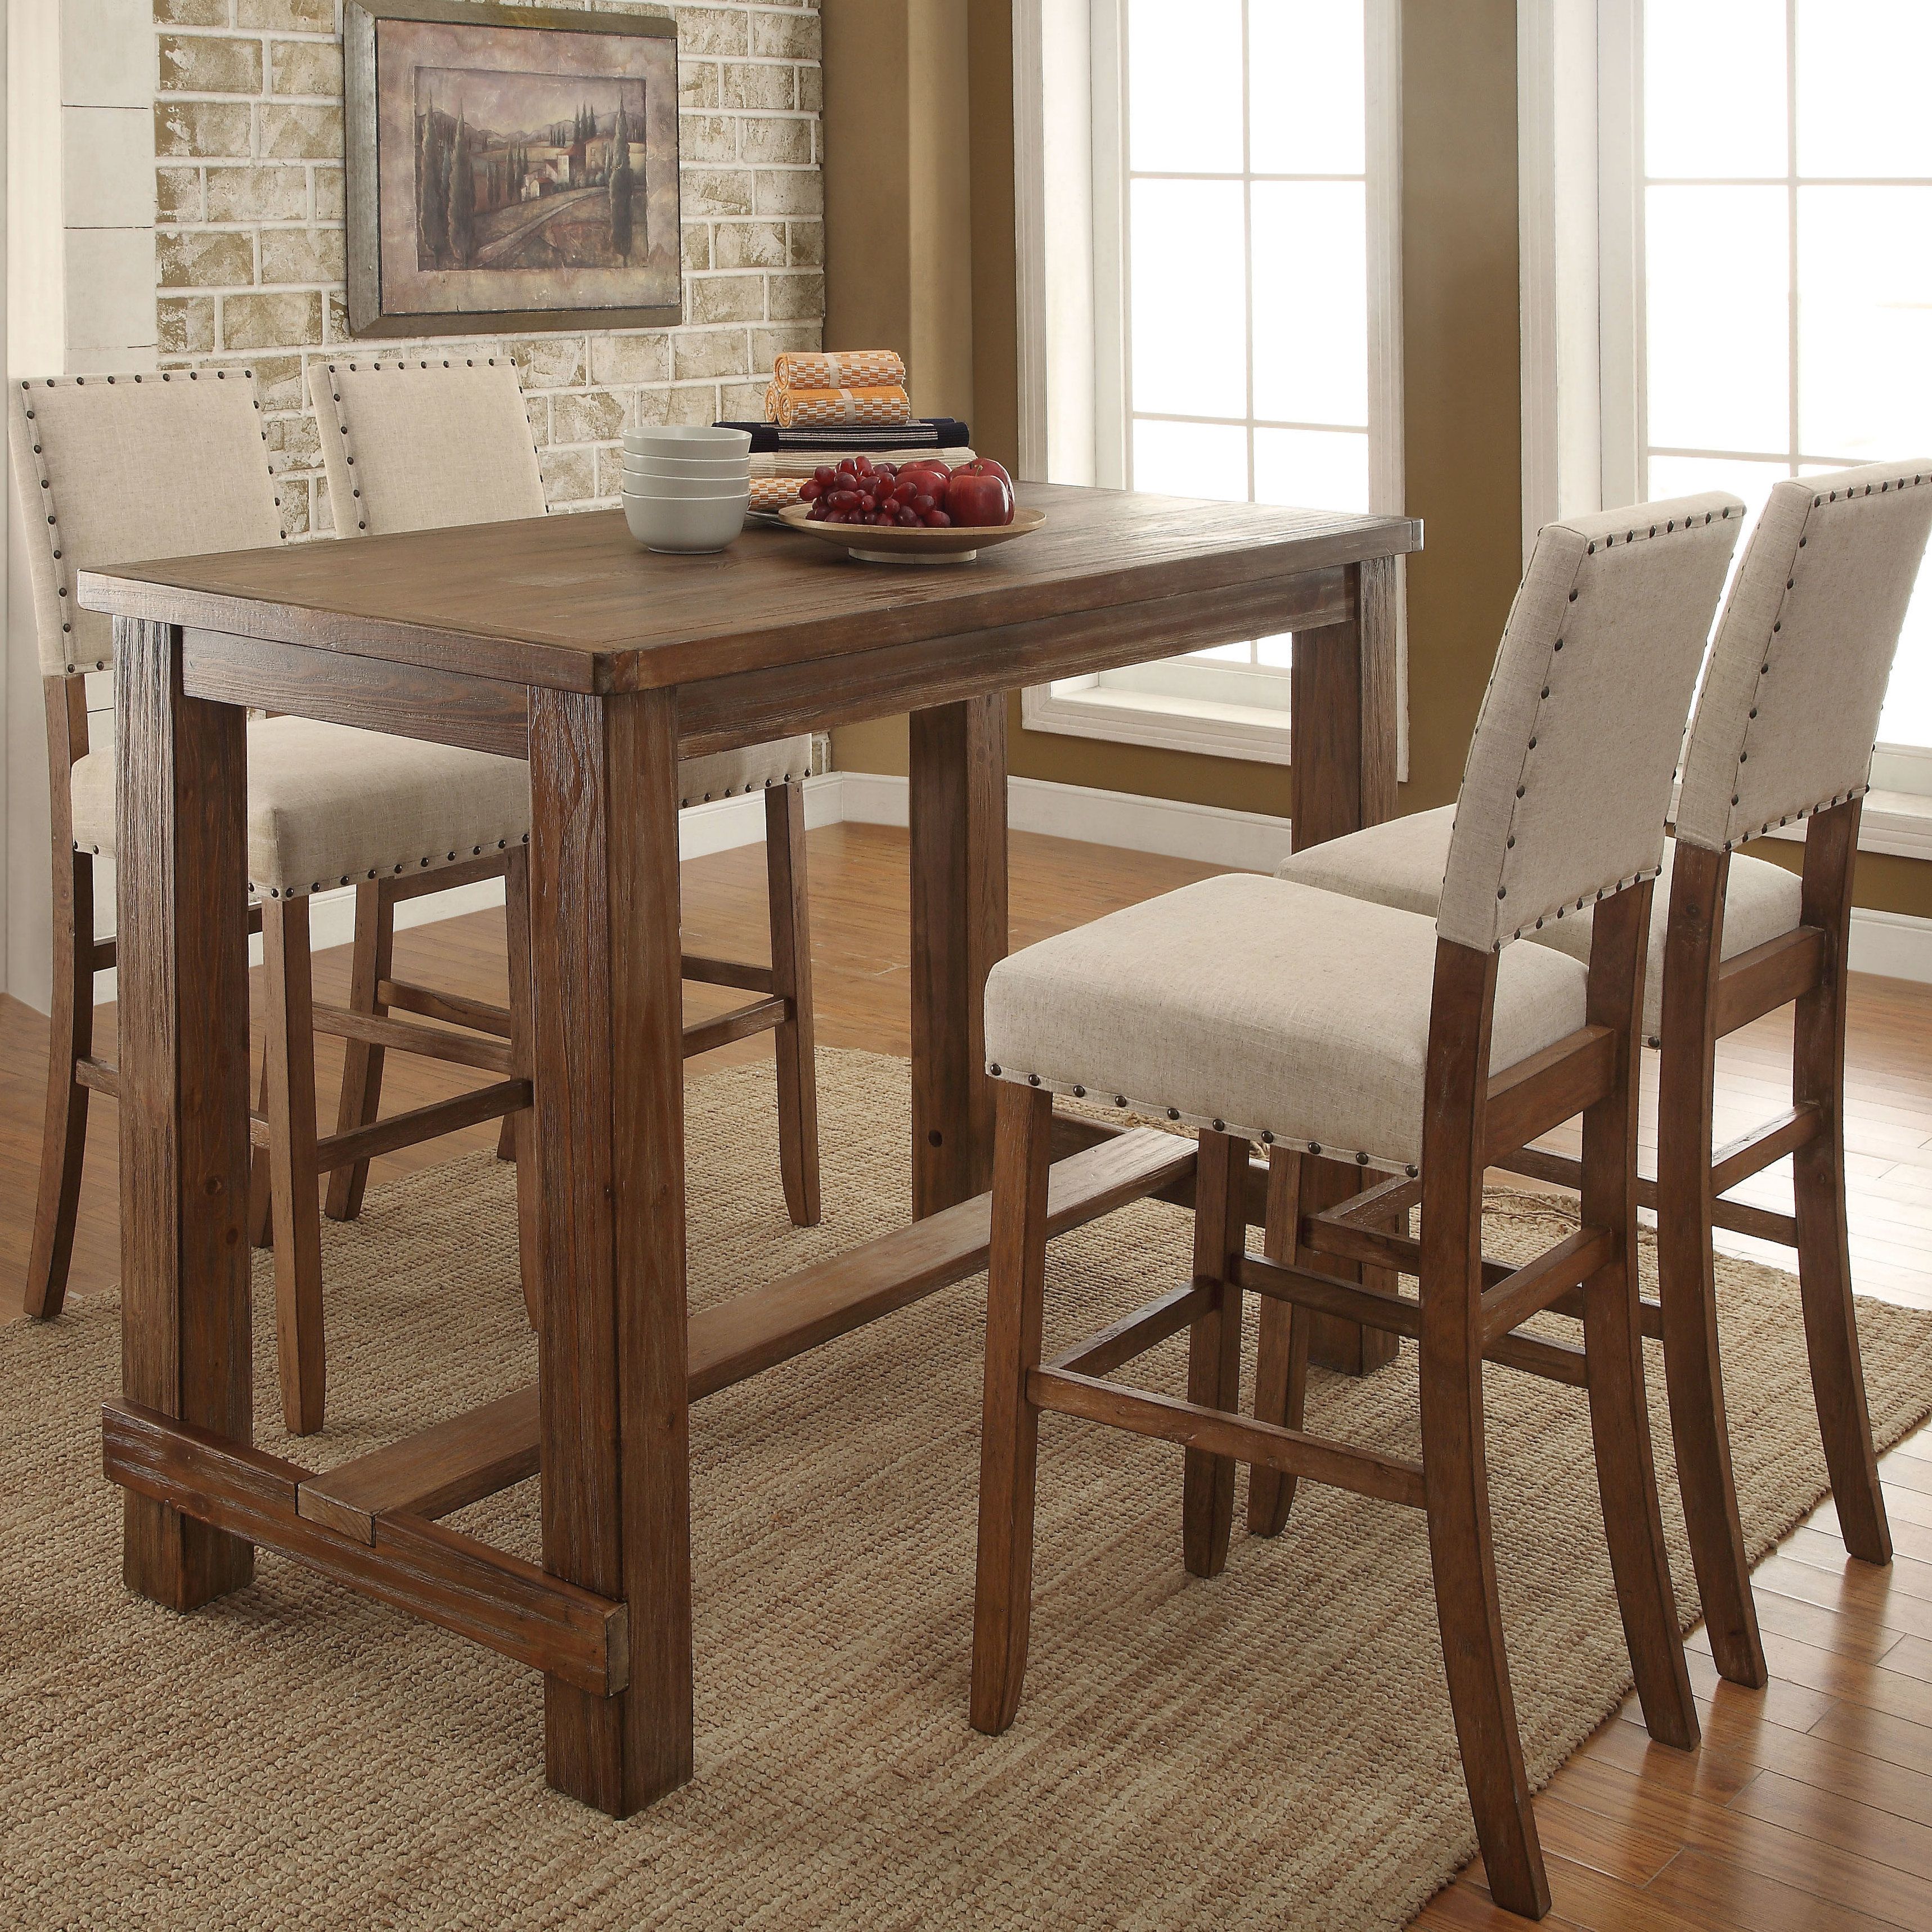 Most Recently Released Calla 5 Piece Dining Sets Inside Orth 5 Piece Counter Height Dining Set & Reviews (View 7 of 20)